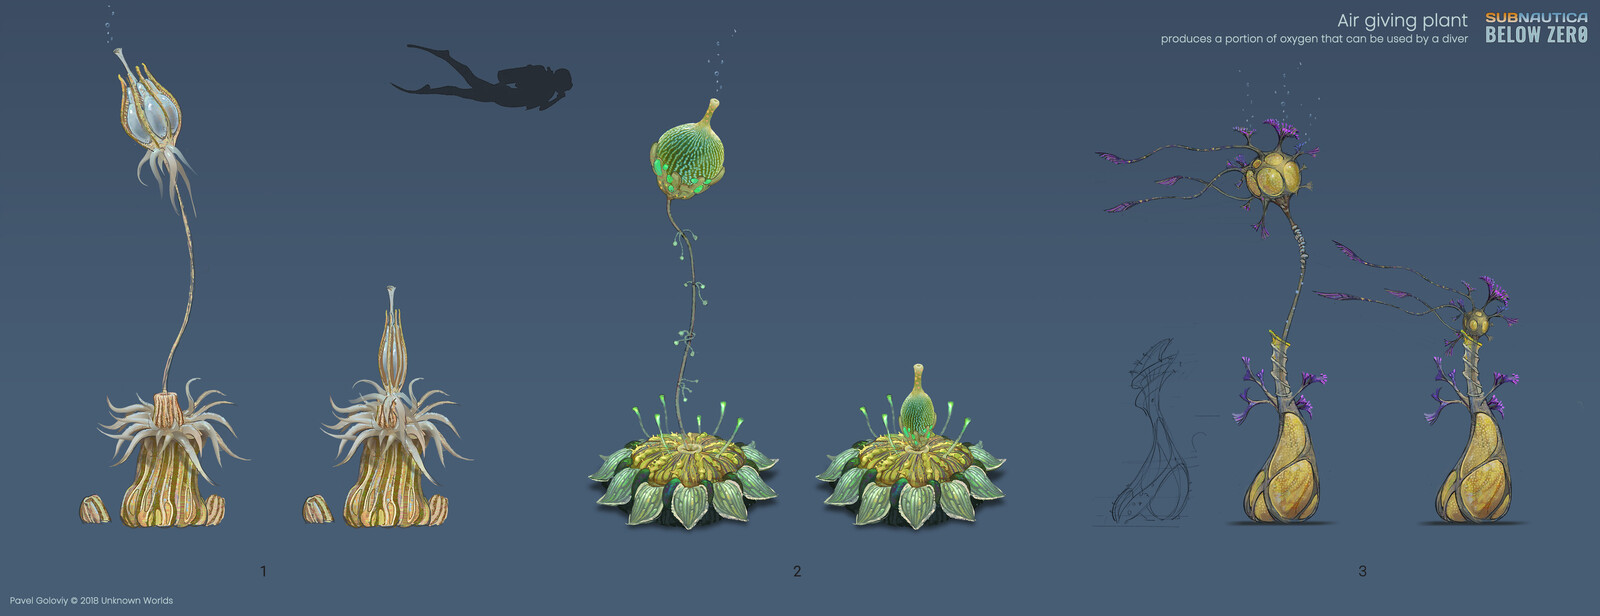 Air giving plant variants